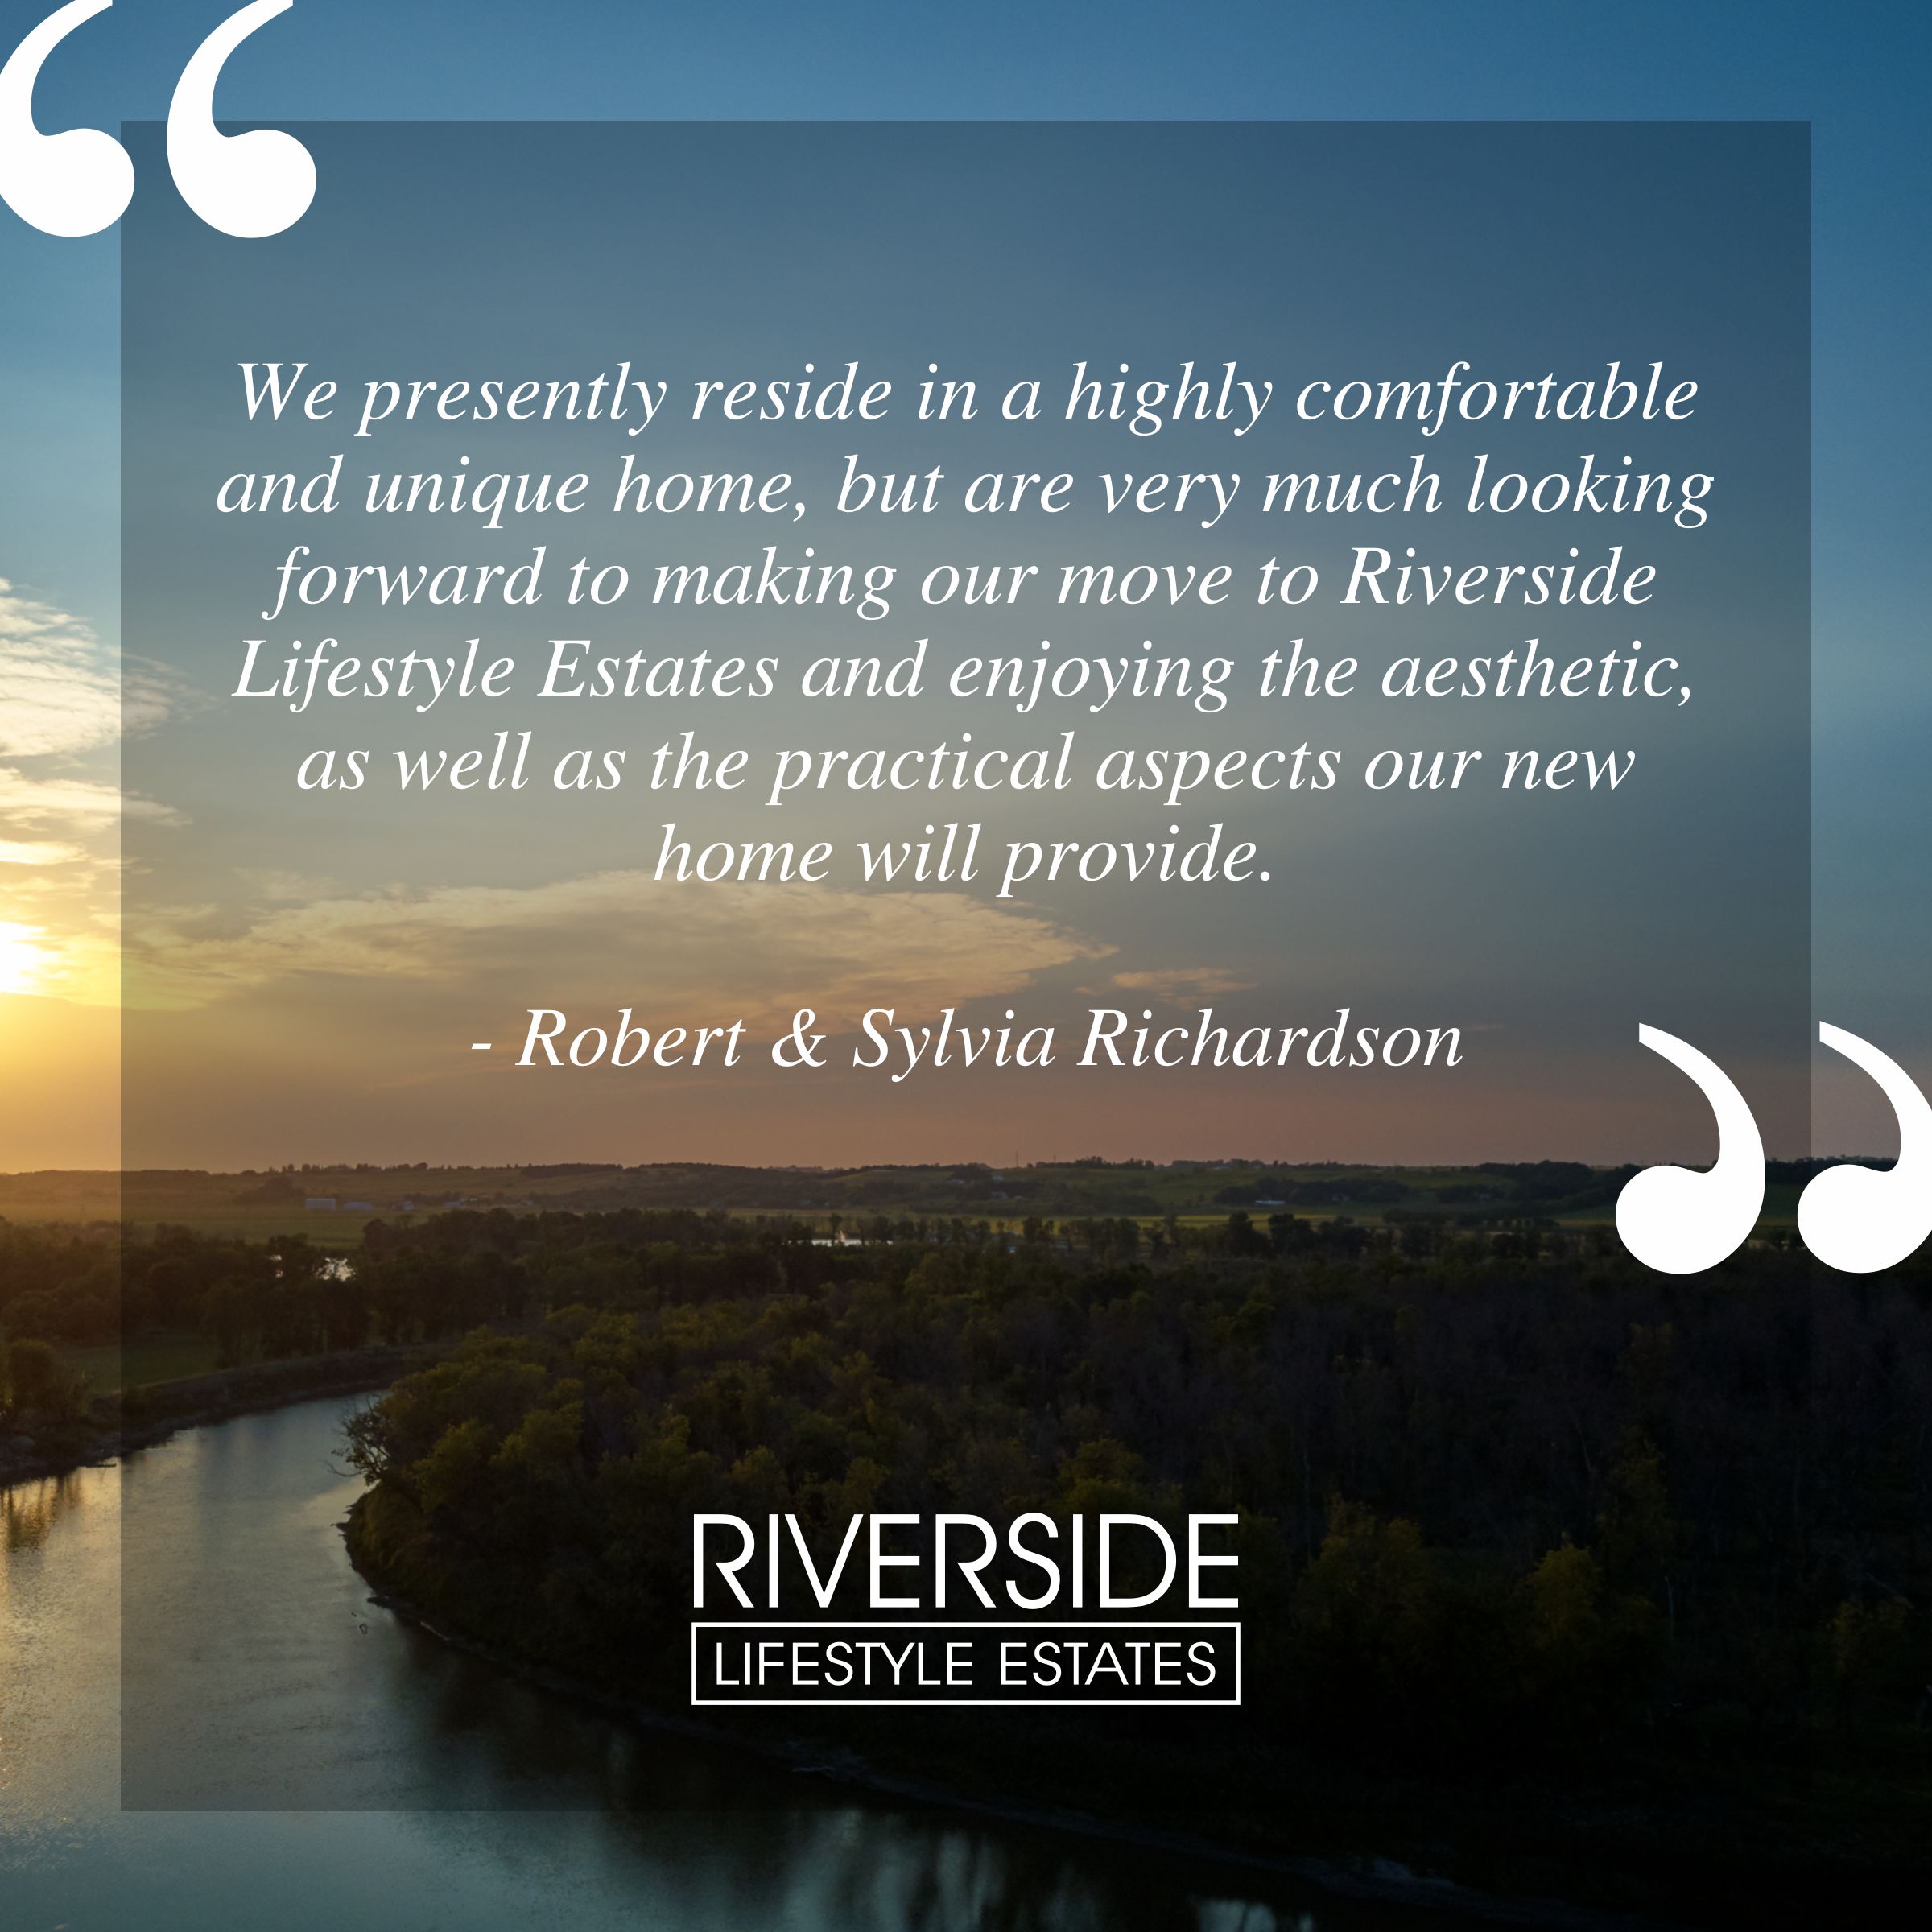 Welcome to Riverside Lifestyle Estates Robert and Sylvia